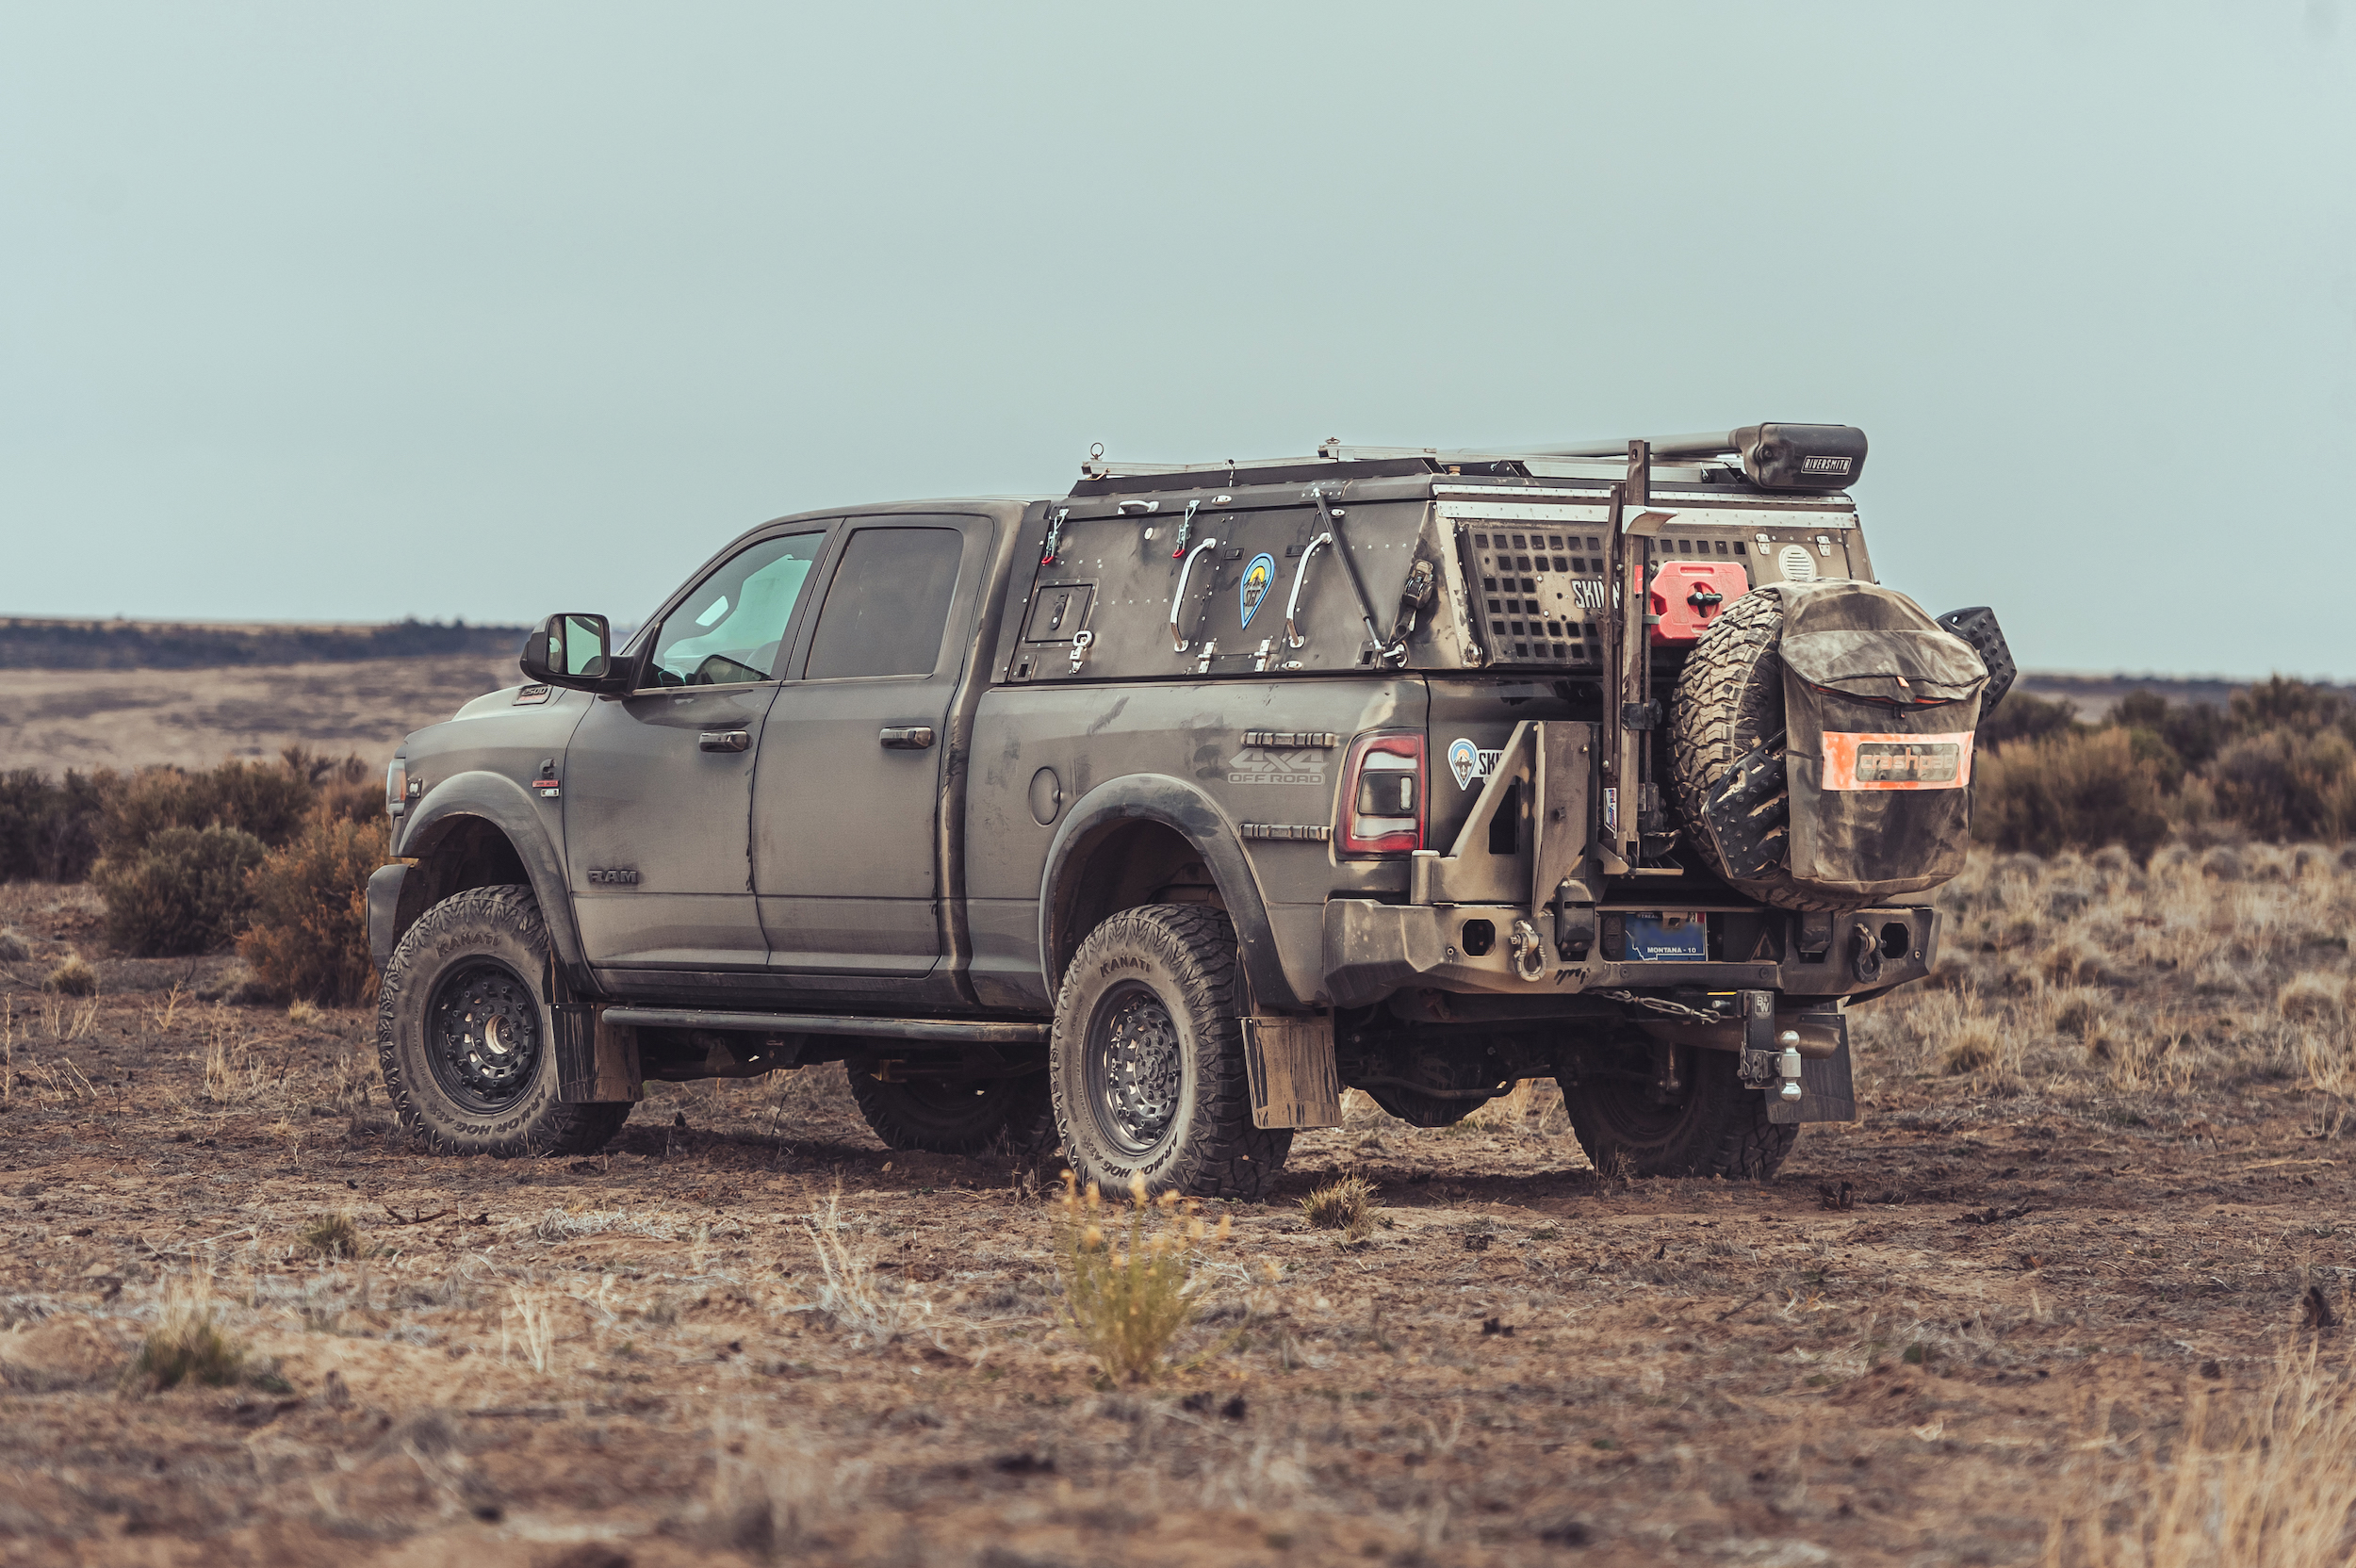 A rugged off-road truck parked on a barren, rugged landscape. This overland beast is equipped with large tires, a spare tire at the rear, jerry cans, and various gear attached to the bed. The terrain is a mix of dirt and sparse vegetation under an overcast sky.